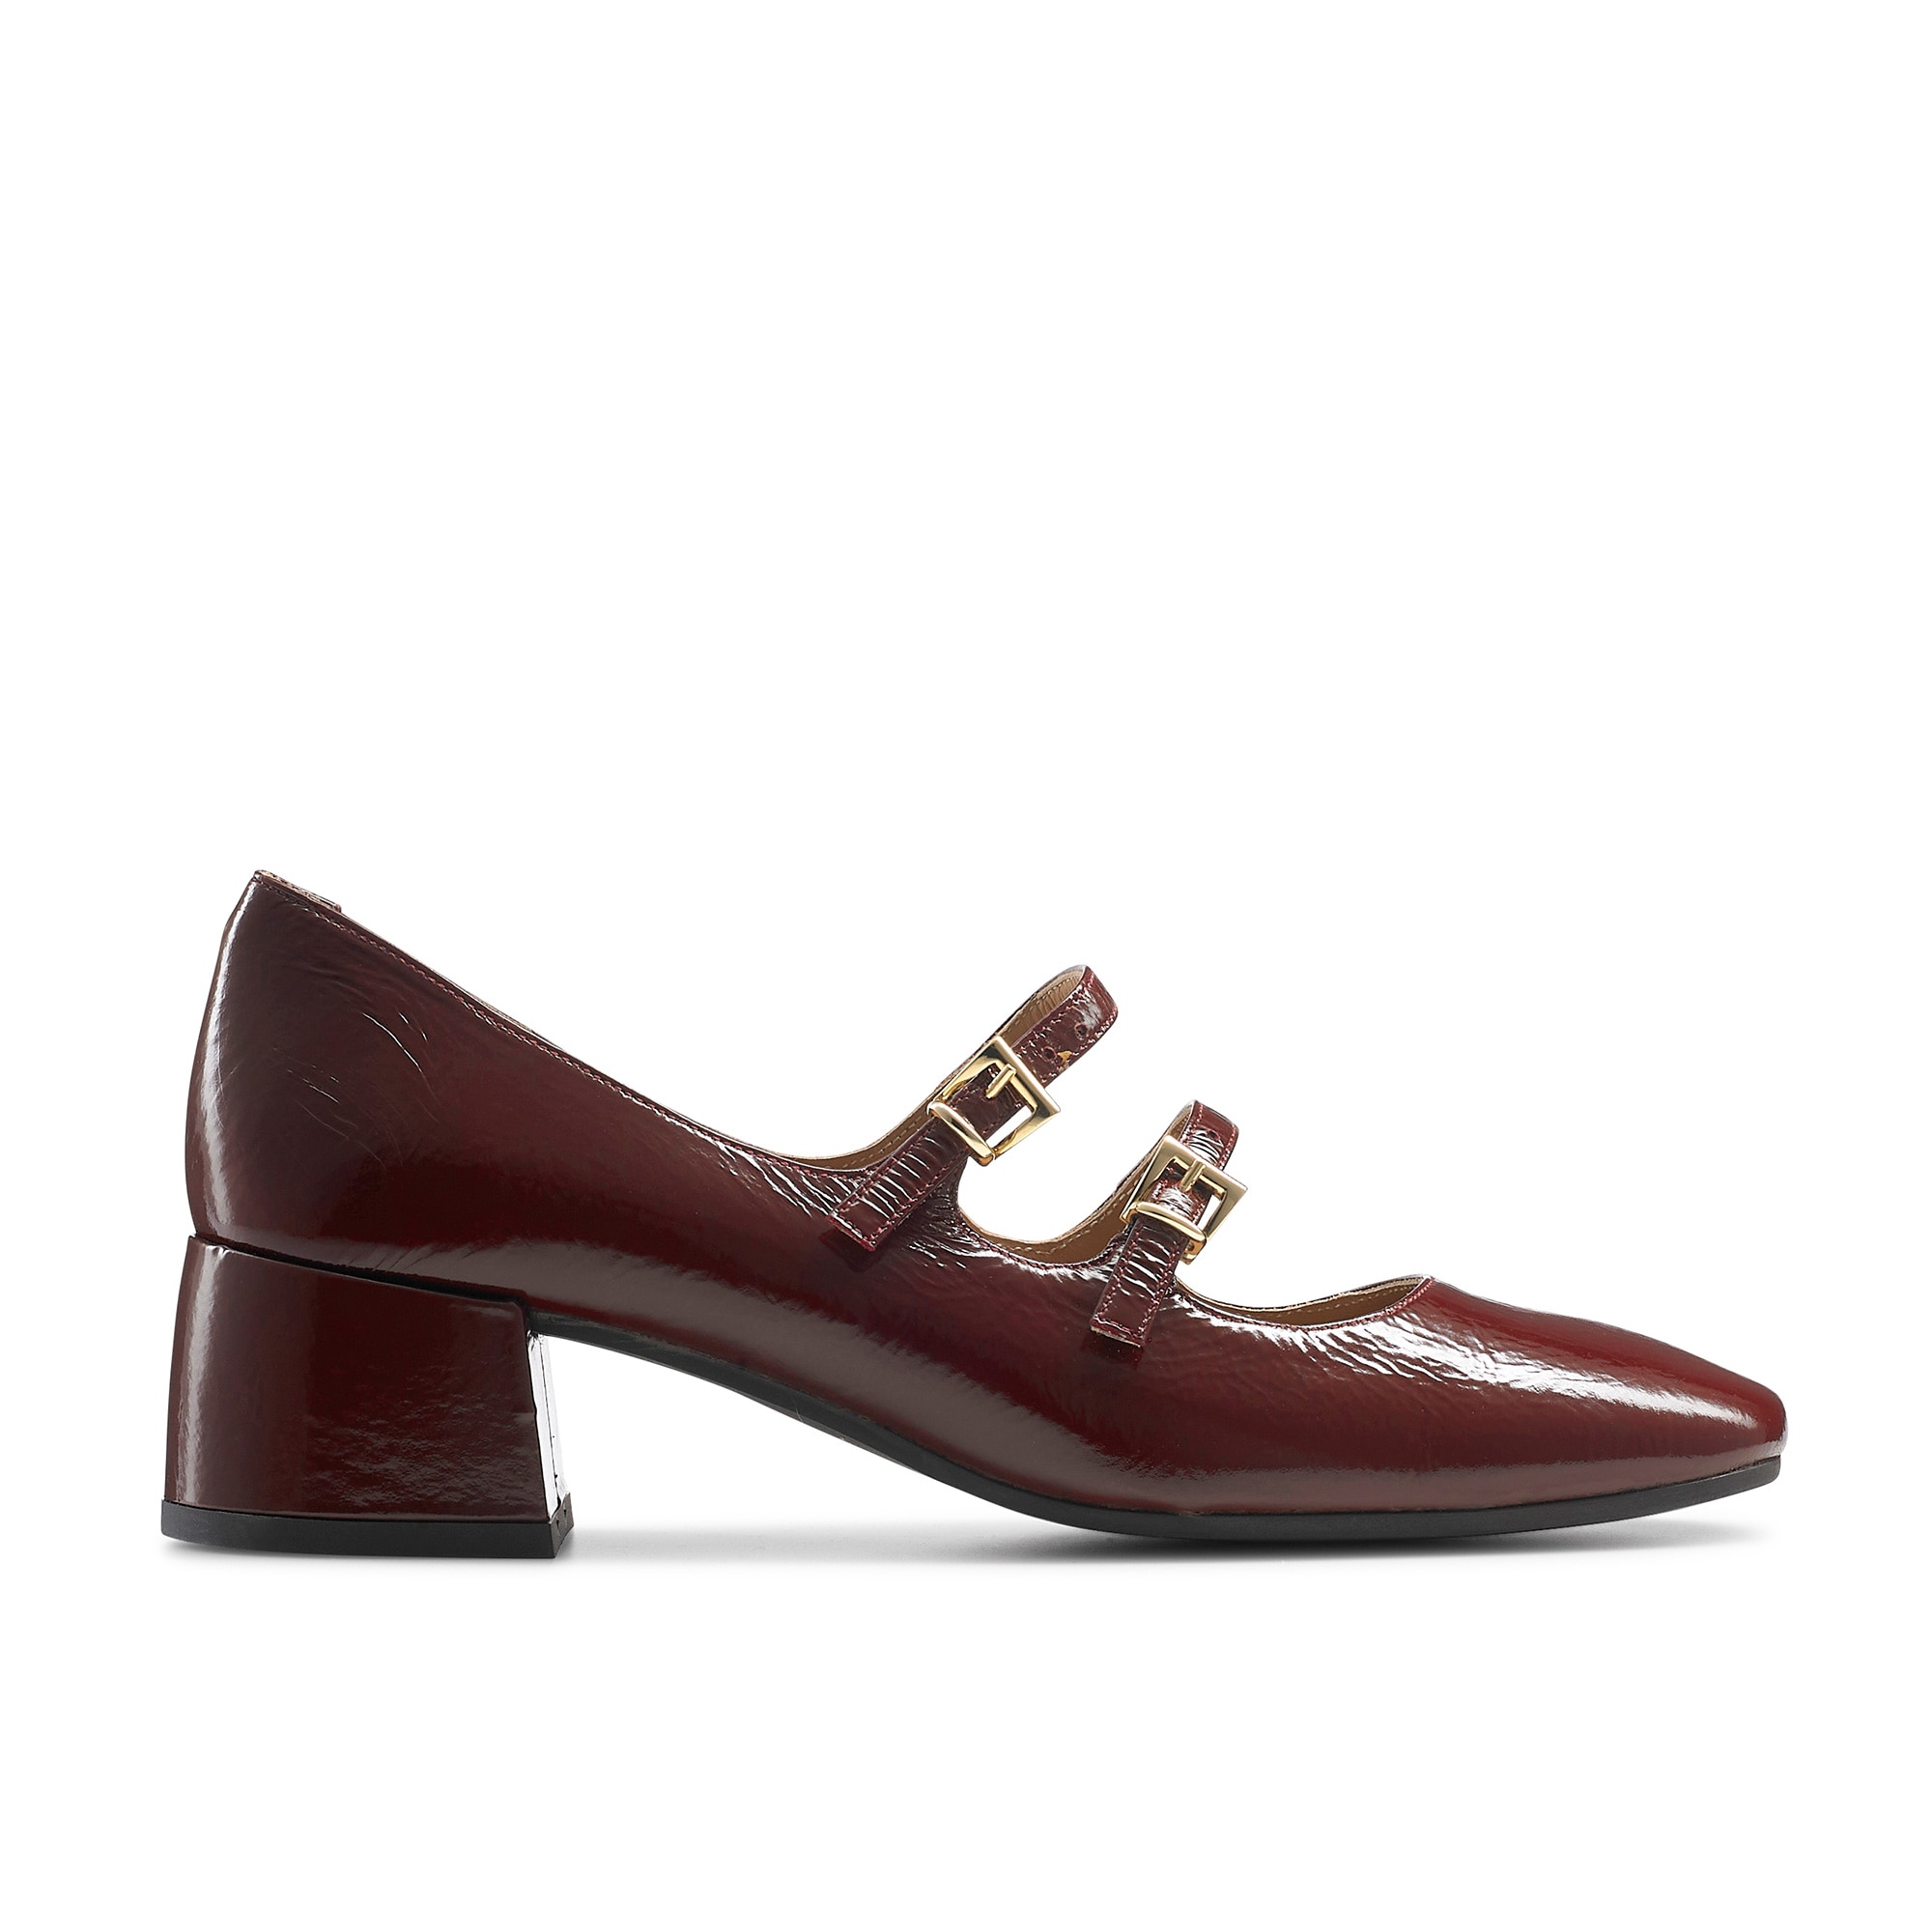 Russell and Bromley Jane heels in brown